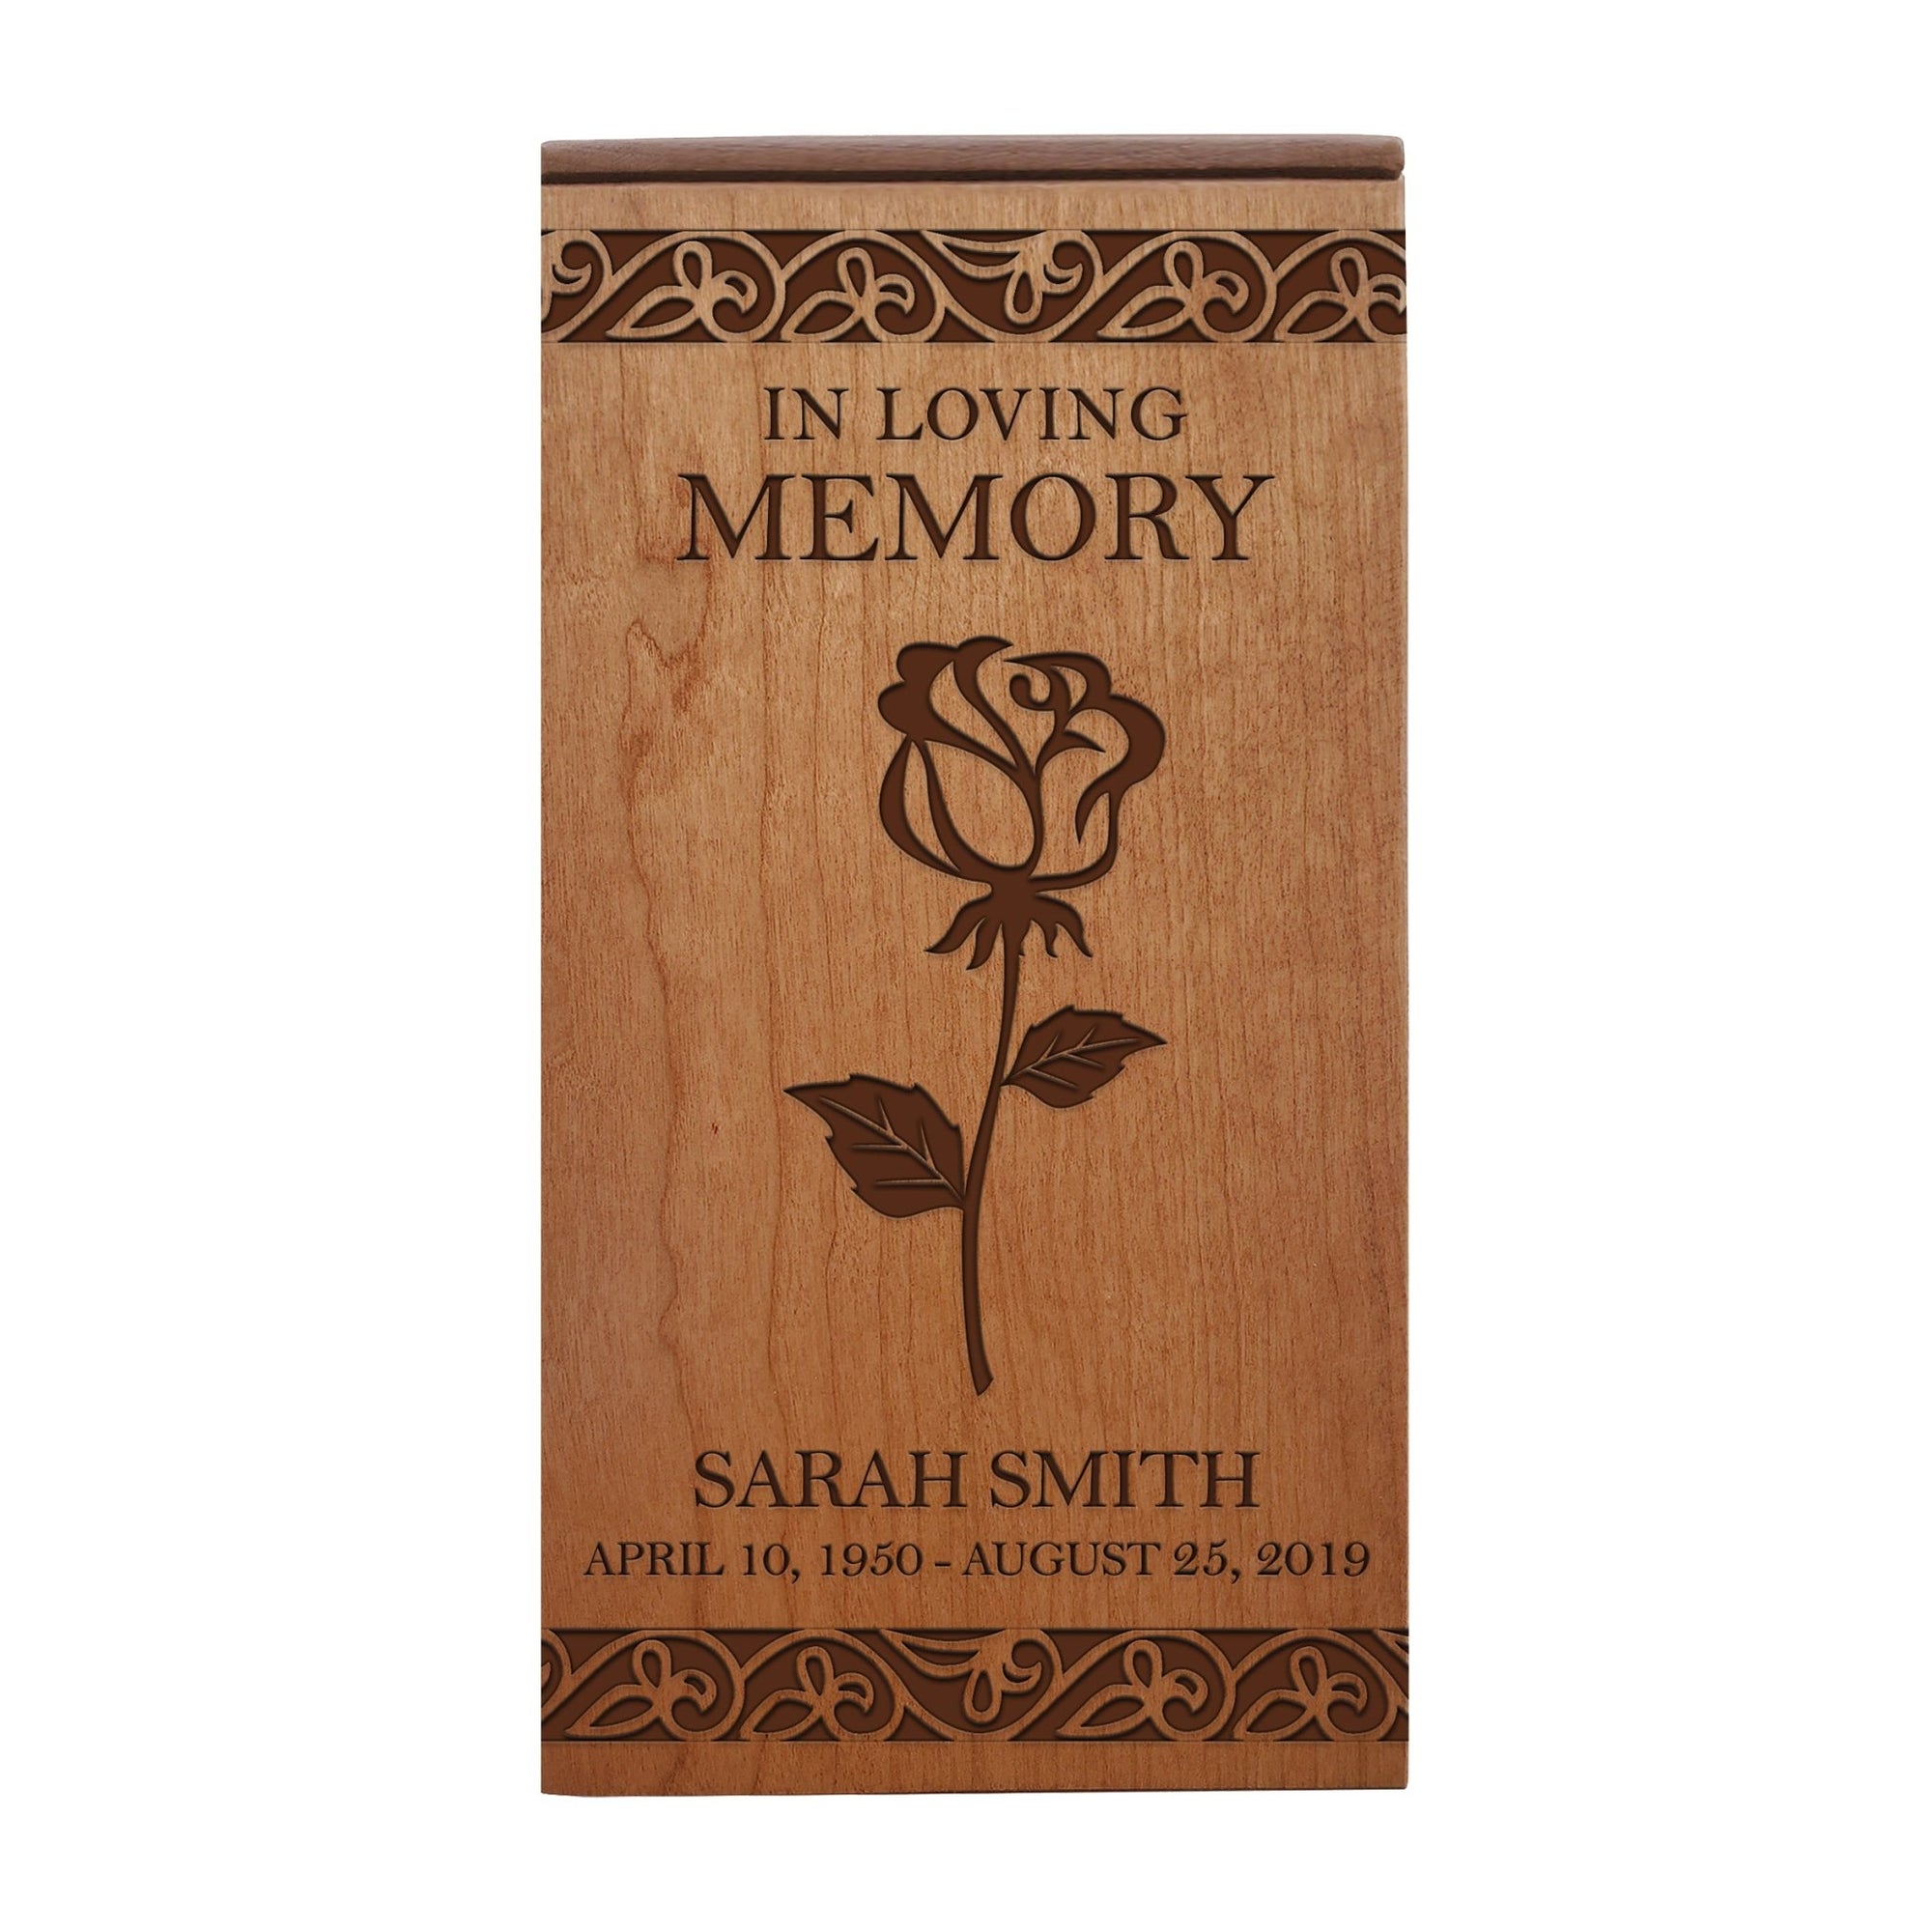 Custom Engraved Memorial Cremation Keepsake Urn Box Holds 100 Cu Inches Of Human Ashes In Loving Cross (Rose Bud) - LifeSong Milestones